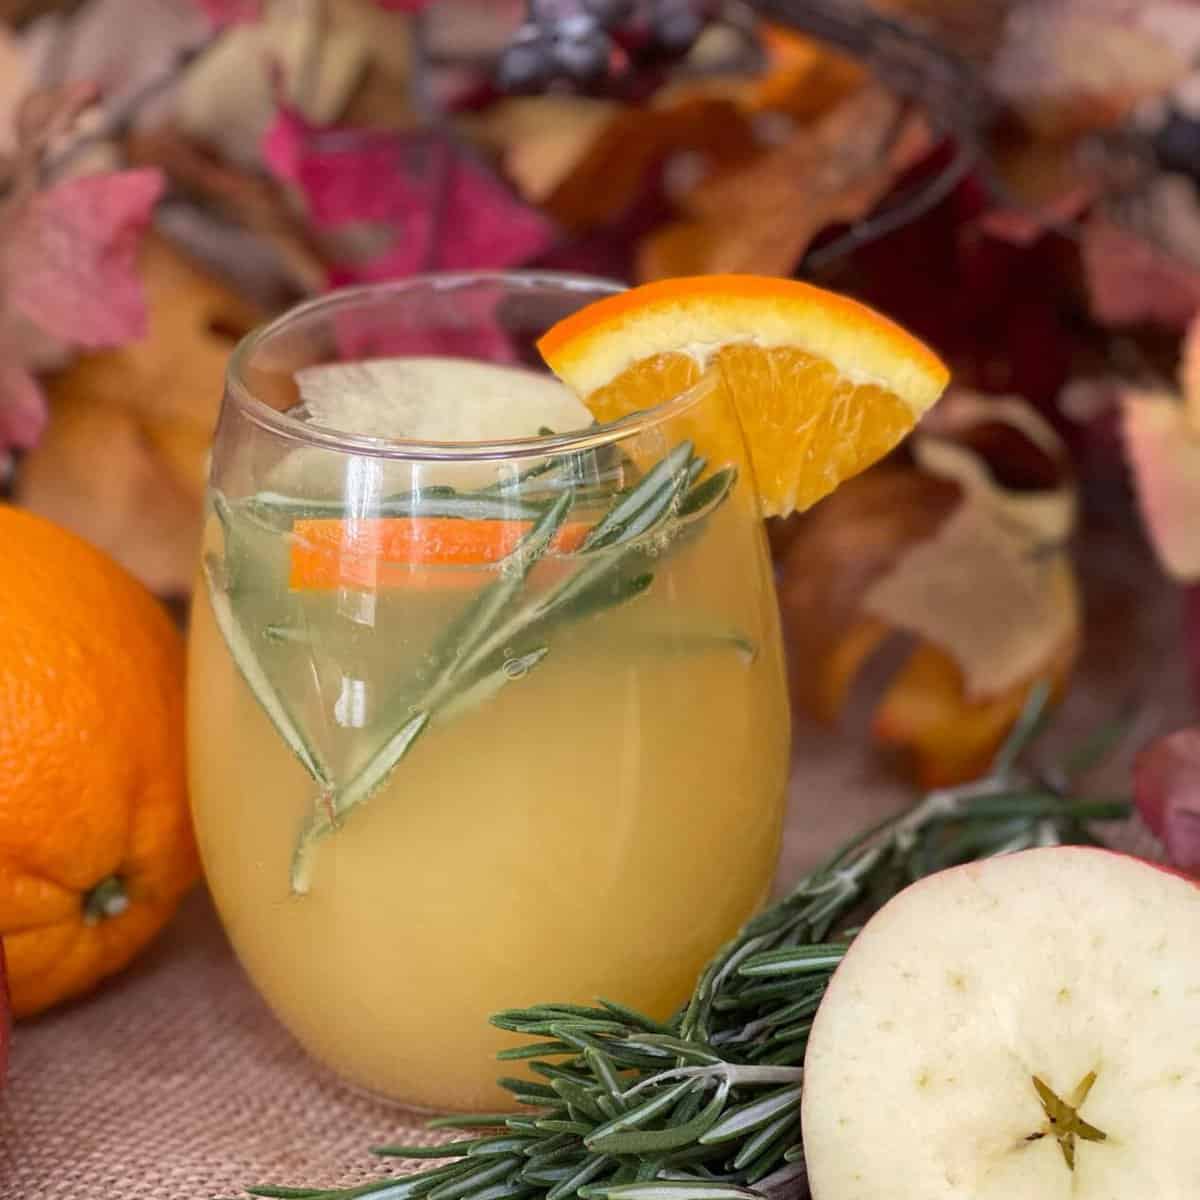  The ultimate comfort drink for chilly fall evenings